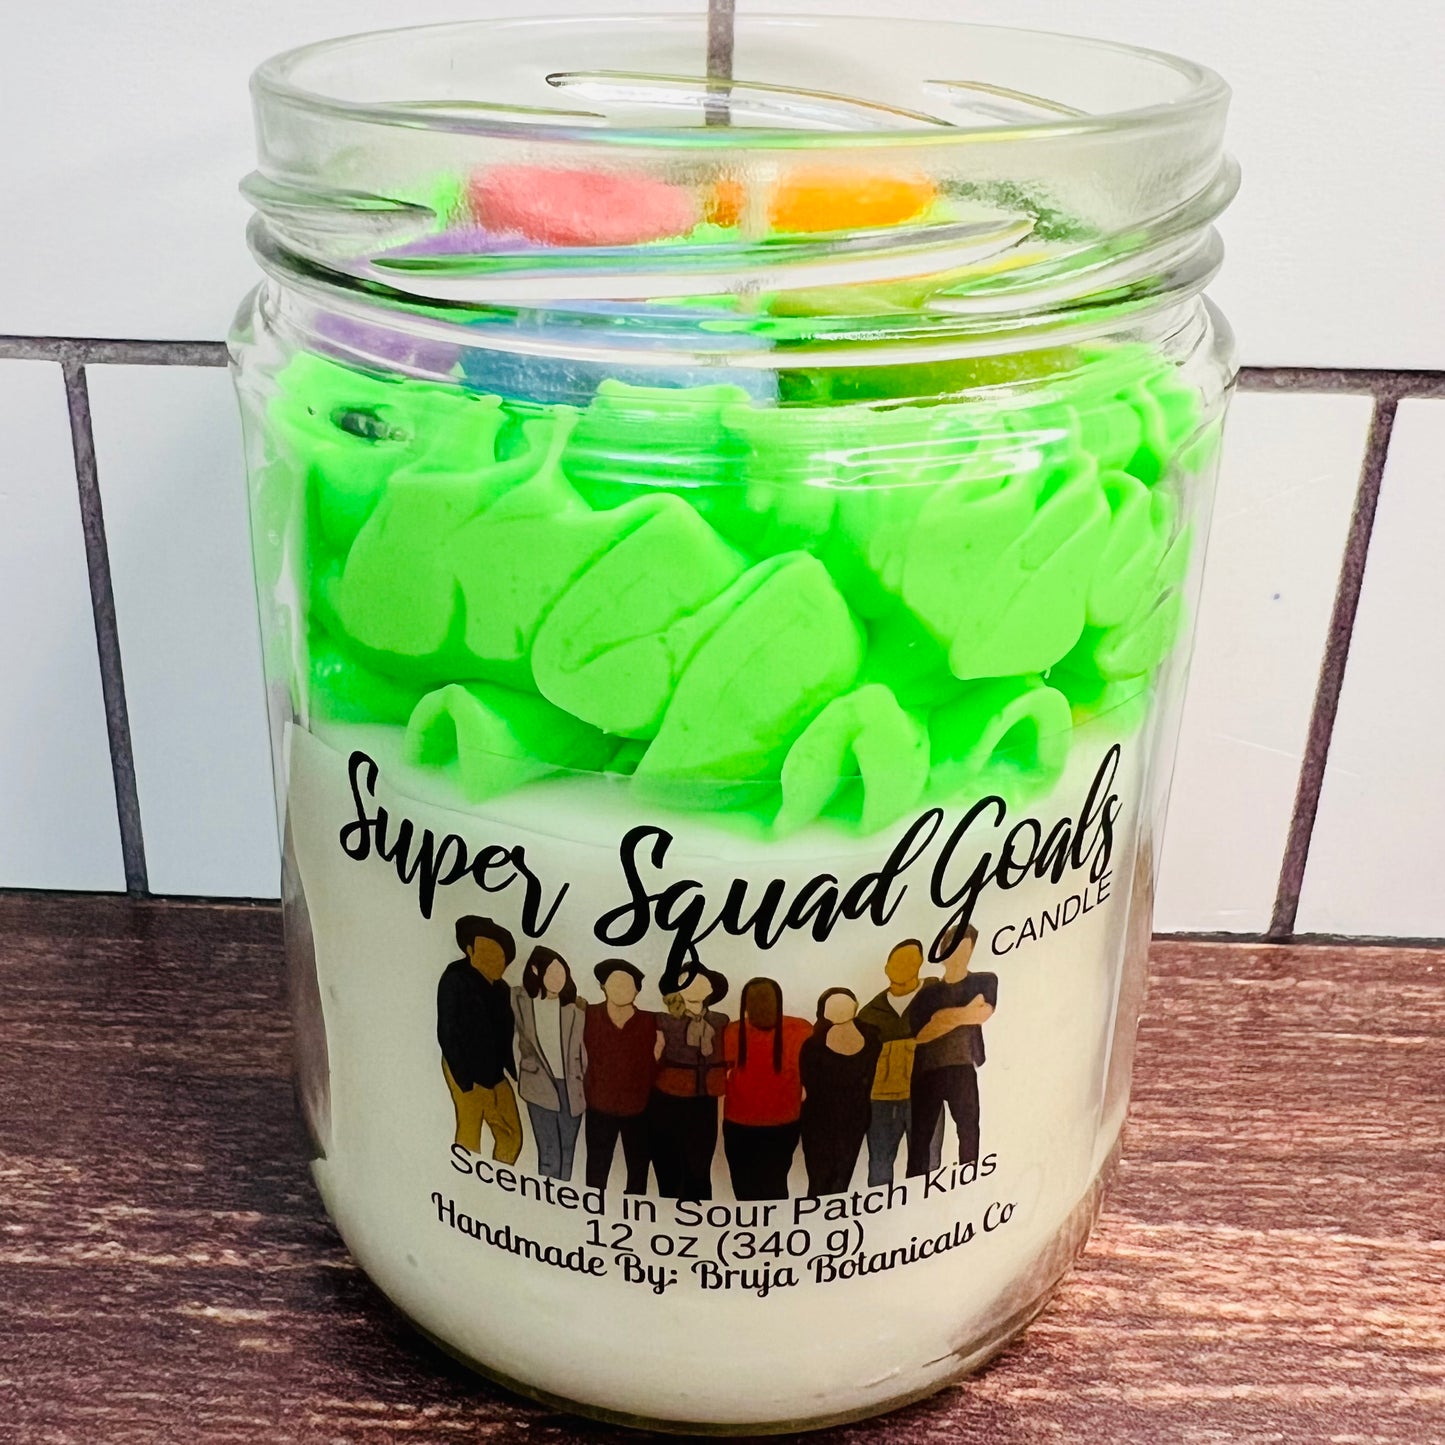 Super Squad Goals Whipped Candle (TVD inspired)